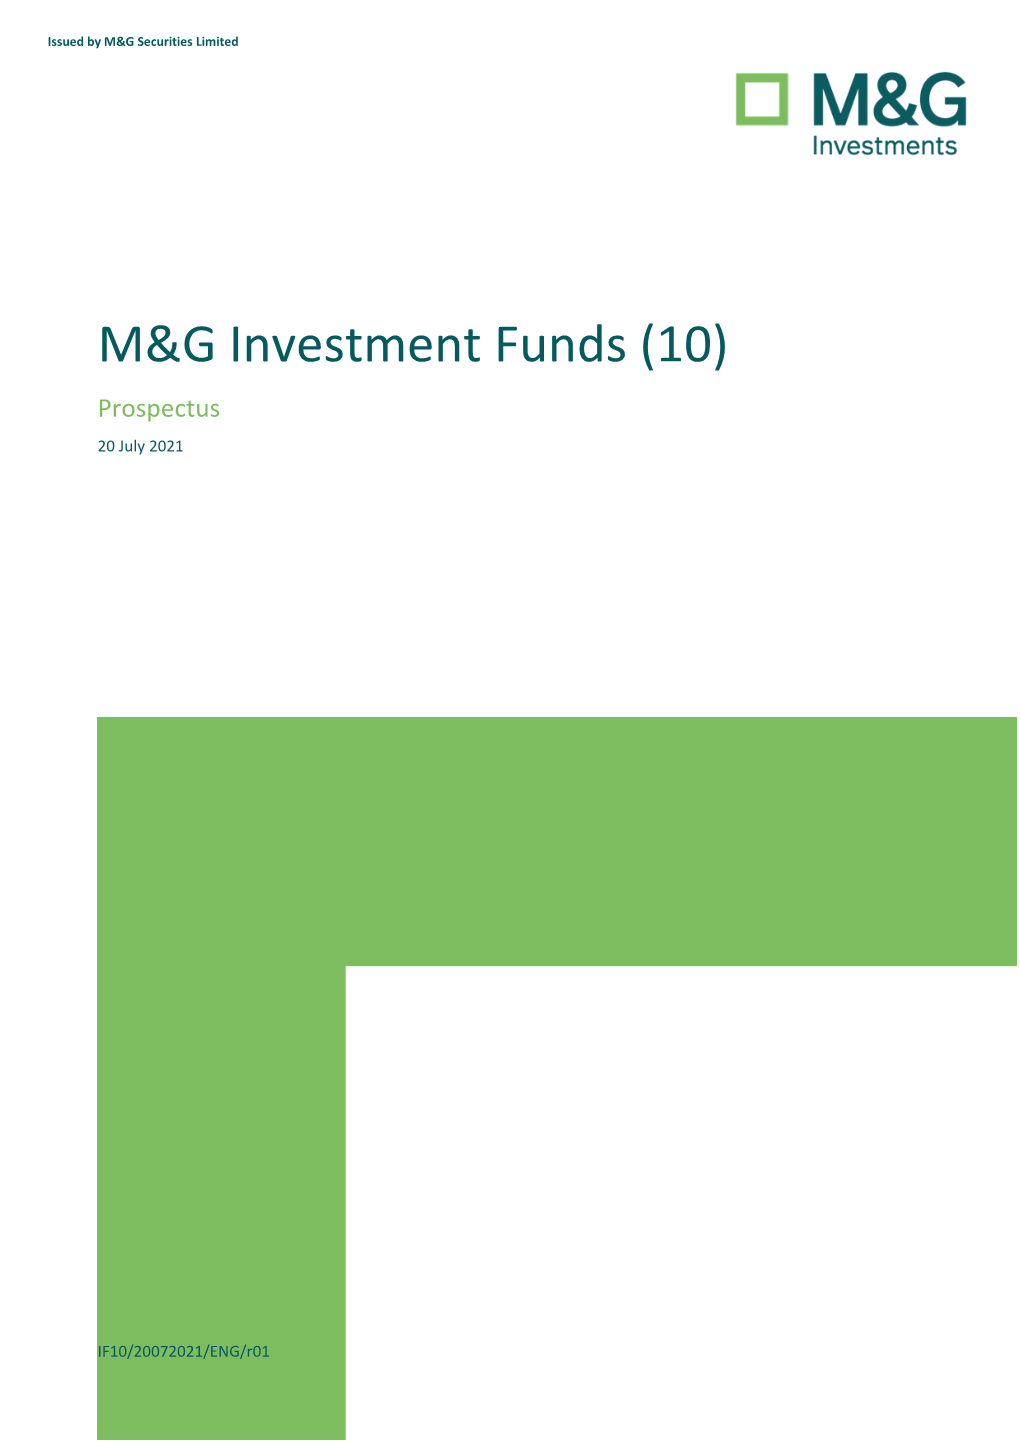 M&G Investment Funds (10)